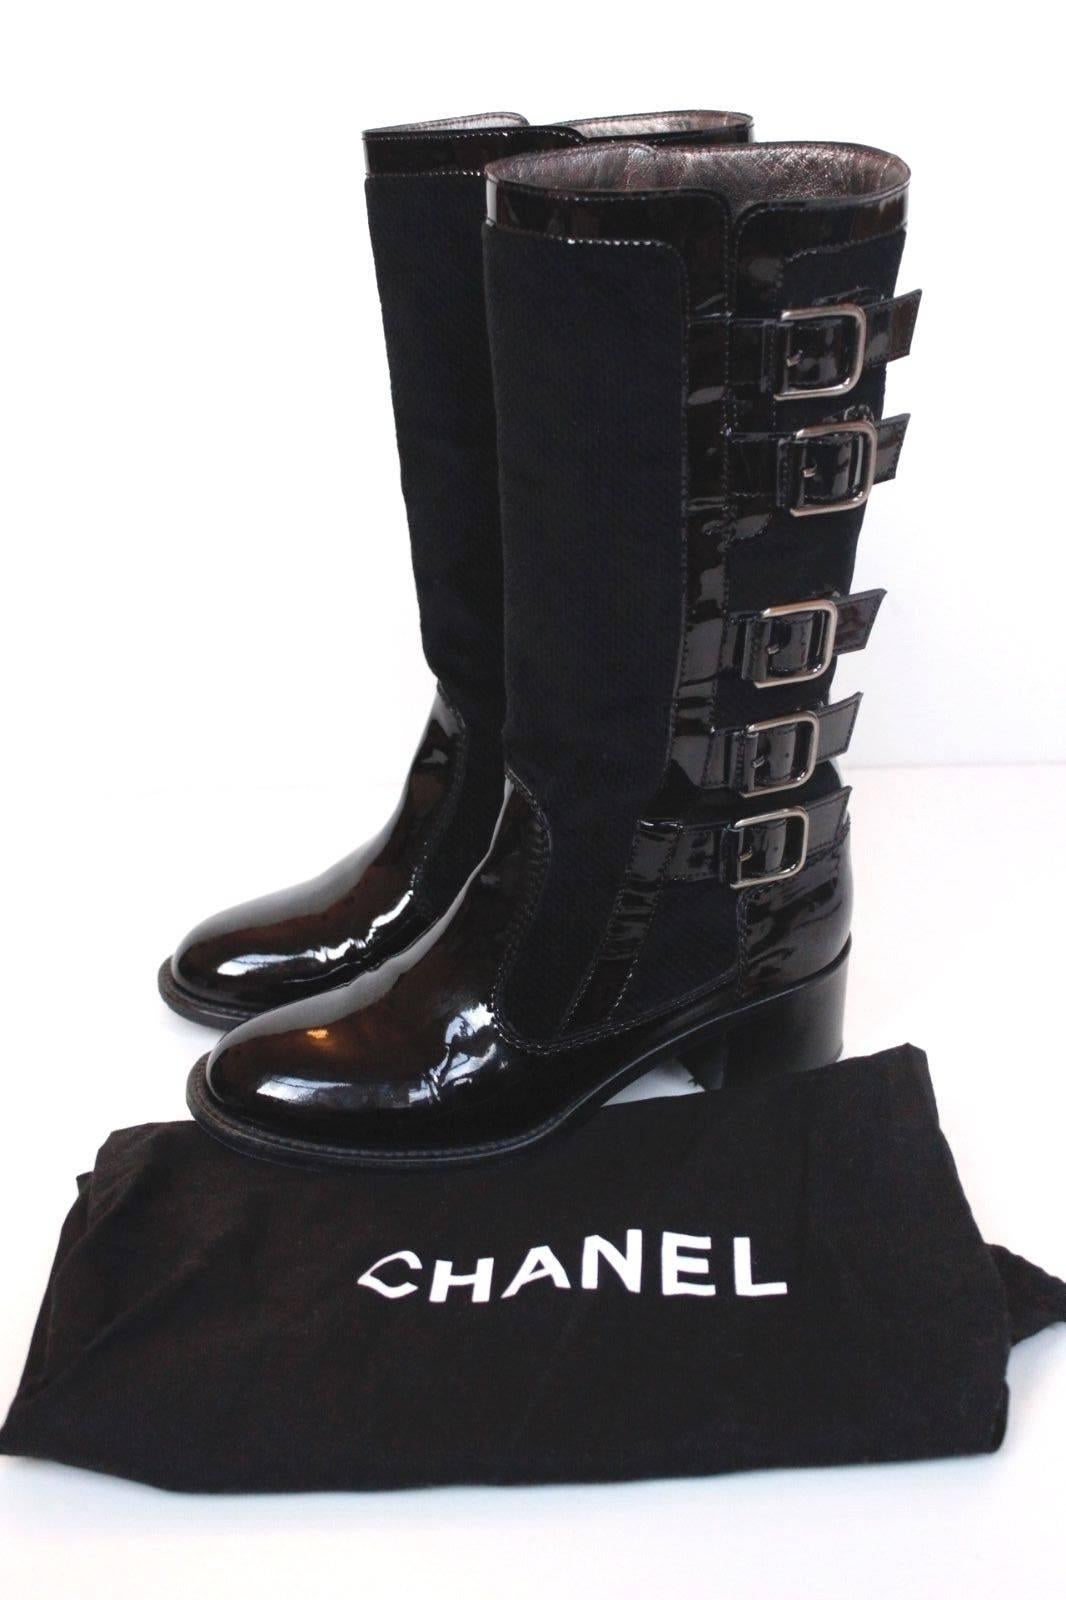 CHANEL Black Patent Leather Multi Buckle Boots 36.5 UK 3.5 
Gorgeous Moto Biker boots from Chanel featuring suede cord with patent leather buckle overlay
Pull on style with Chanel patent tab to the inner side 
As with most Chanel shoe sizes, its